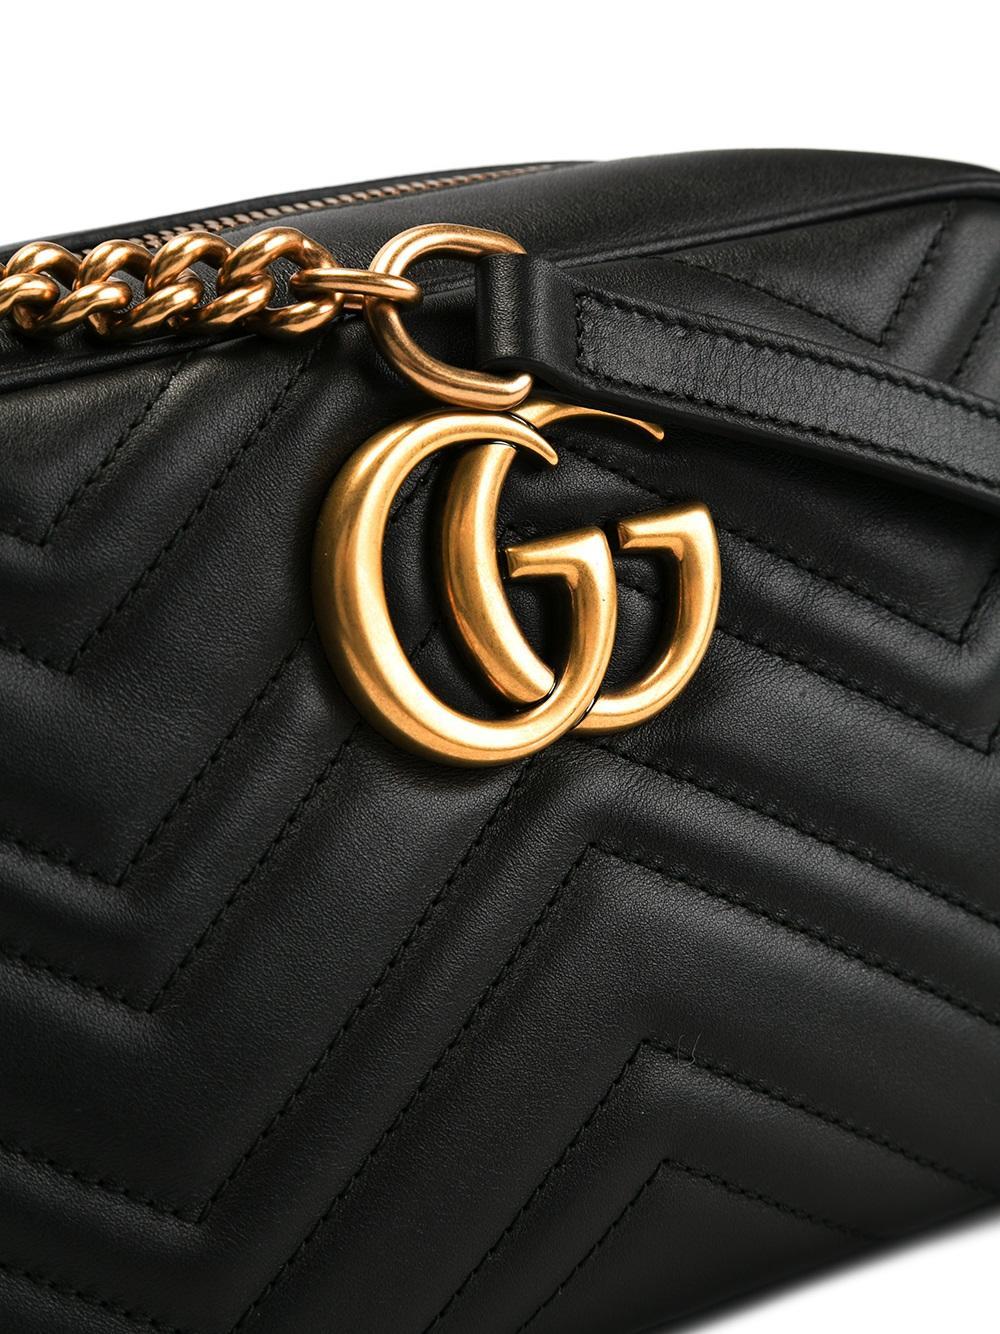 Gucci Leather Quilted Crossbody Bag in Black - Lyst